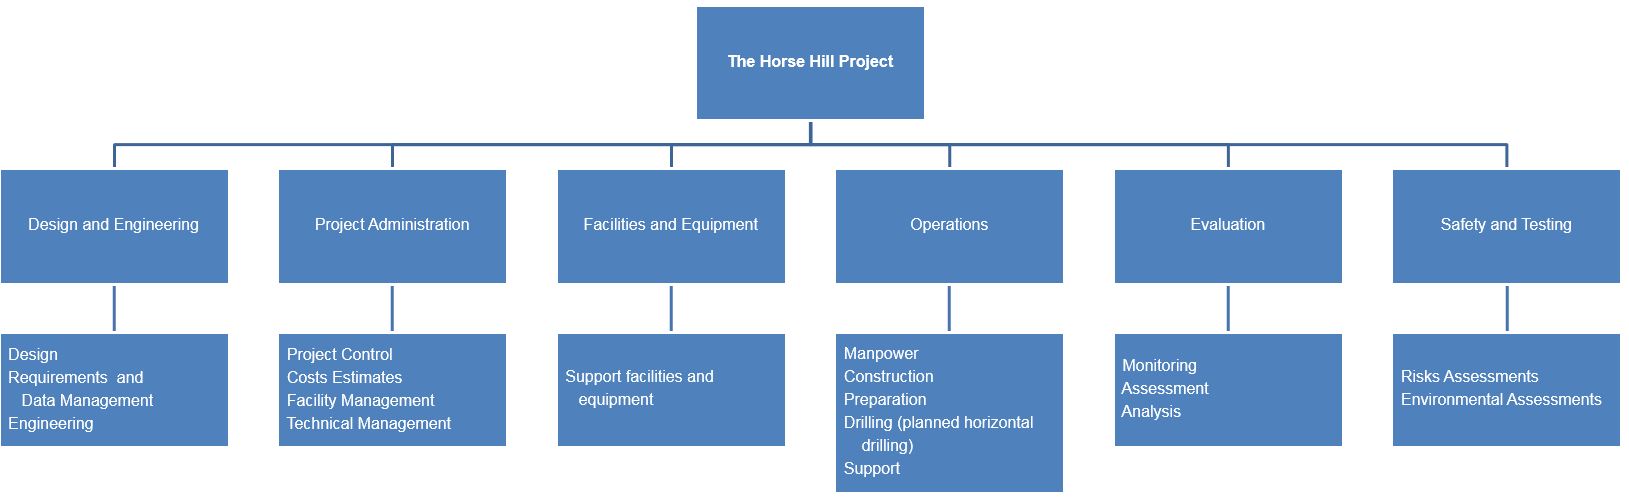 The WBS for the Horse Hill Project.